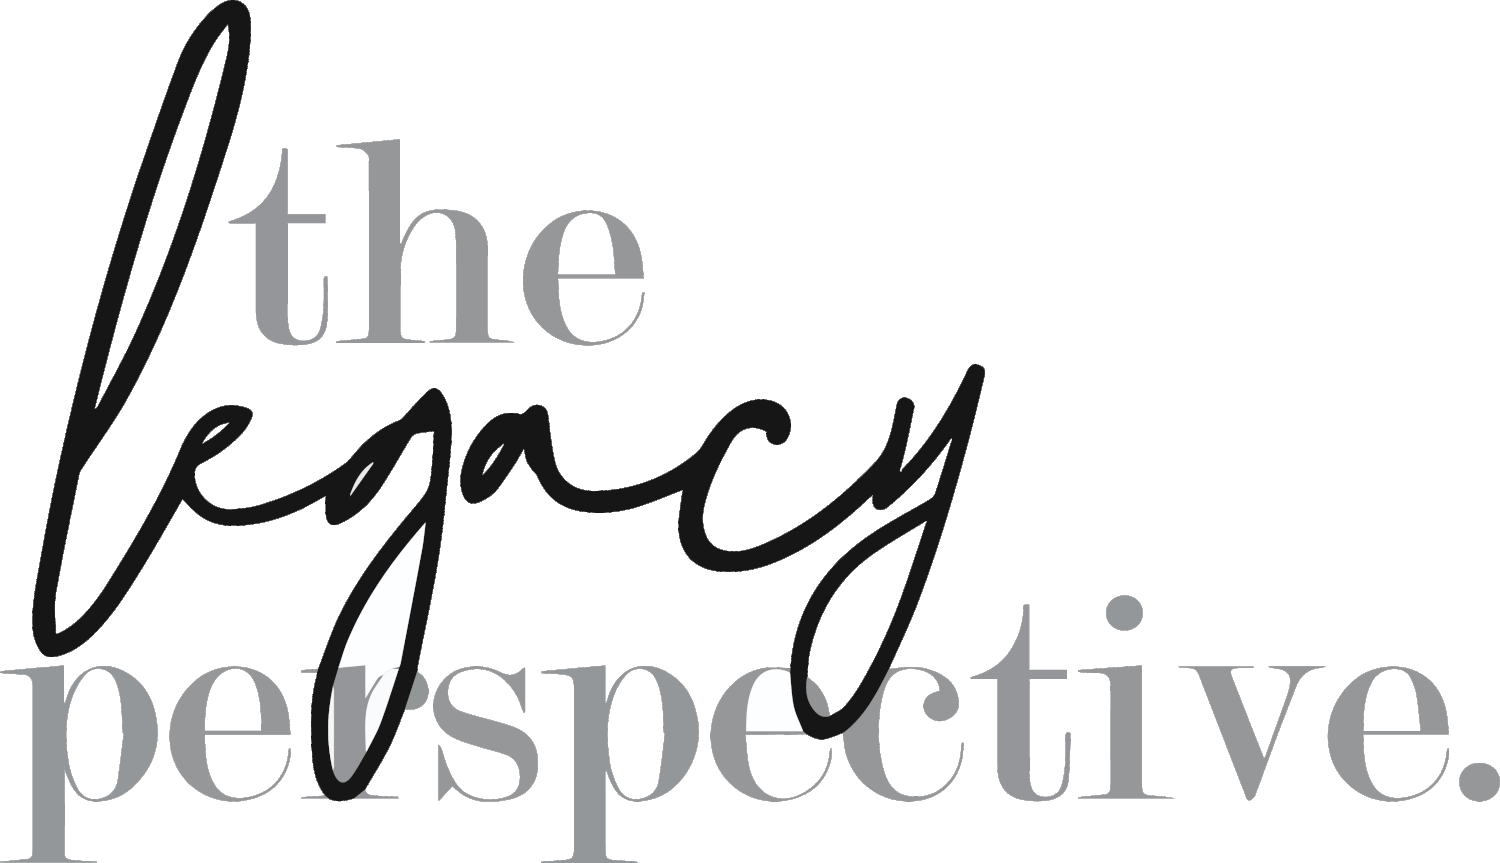 The Legacy Perspective